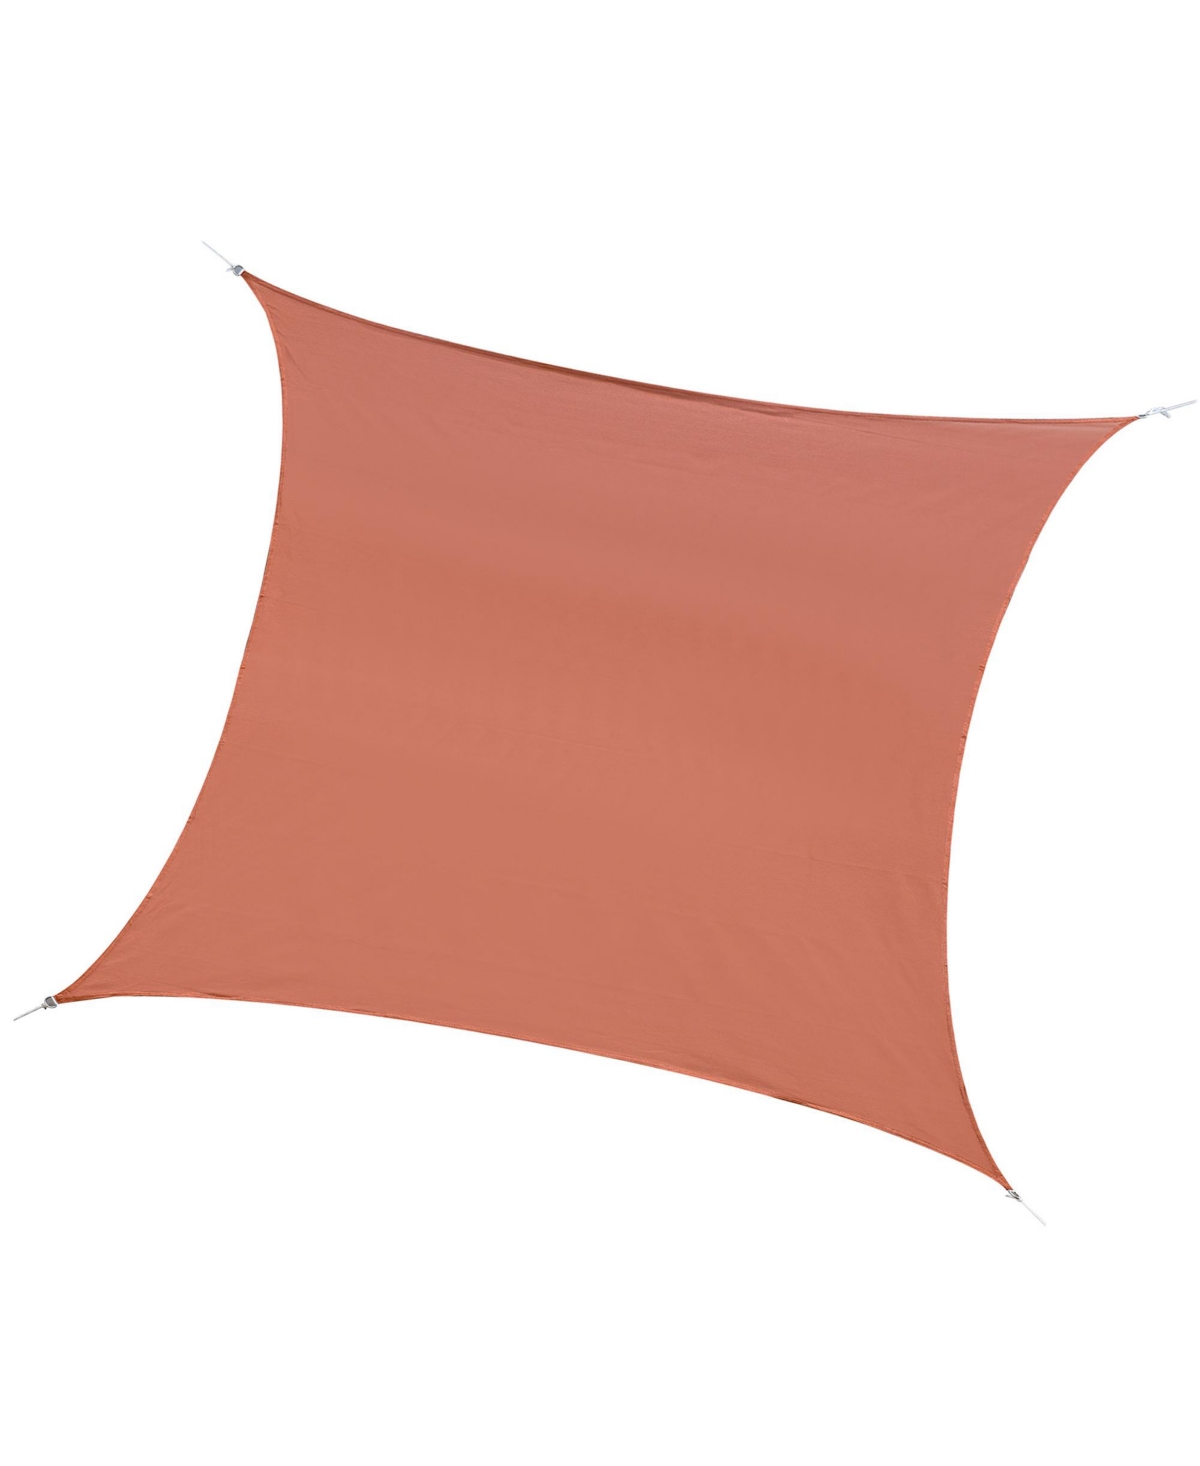 20' x 16' Rectangle Sun Sail Shade Canopy Shade Sail Cloth for Outdoor Patio Deck Yard, Brick Red - Brick red